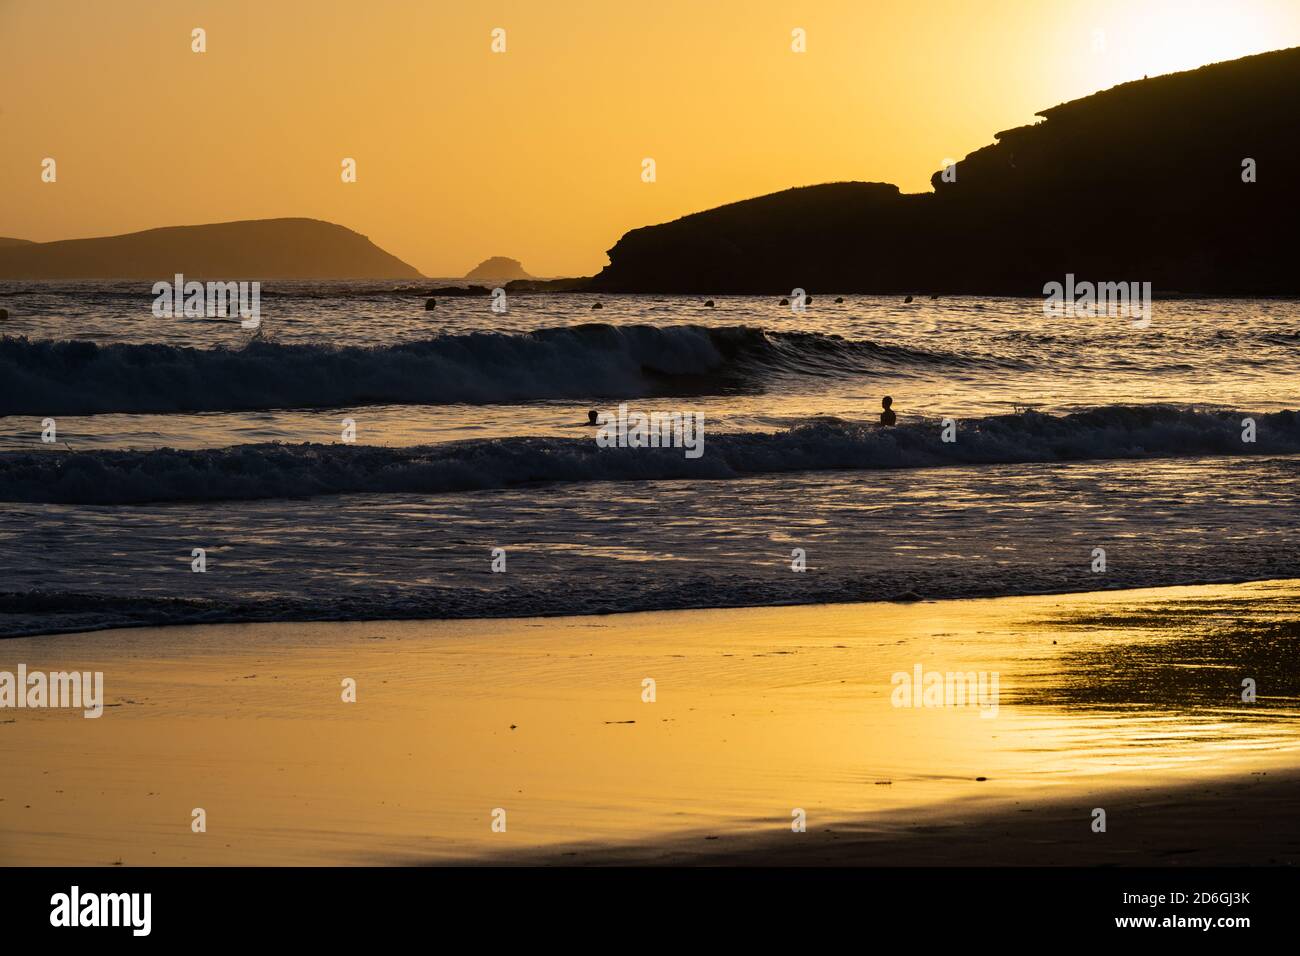 Golden sunset reflected on the shallow water on a lonely beach in Galicia, Spain. Stock Photo